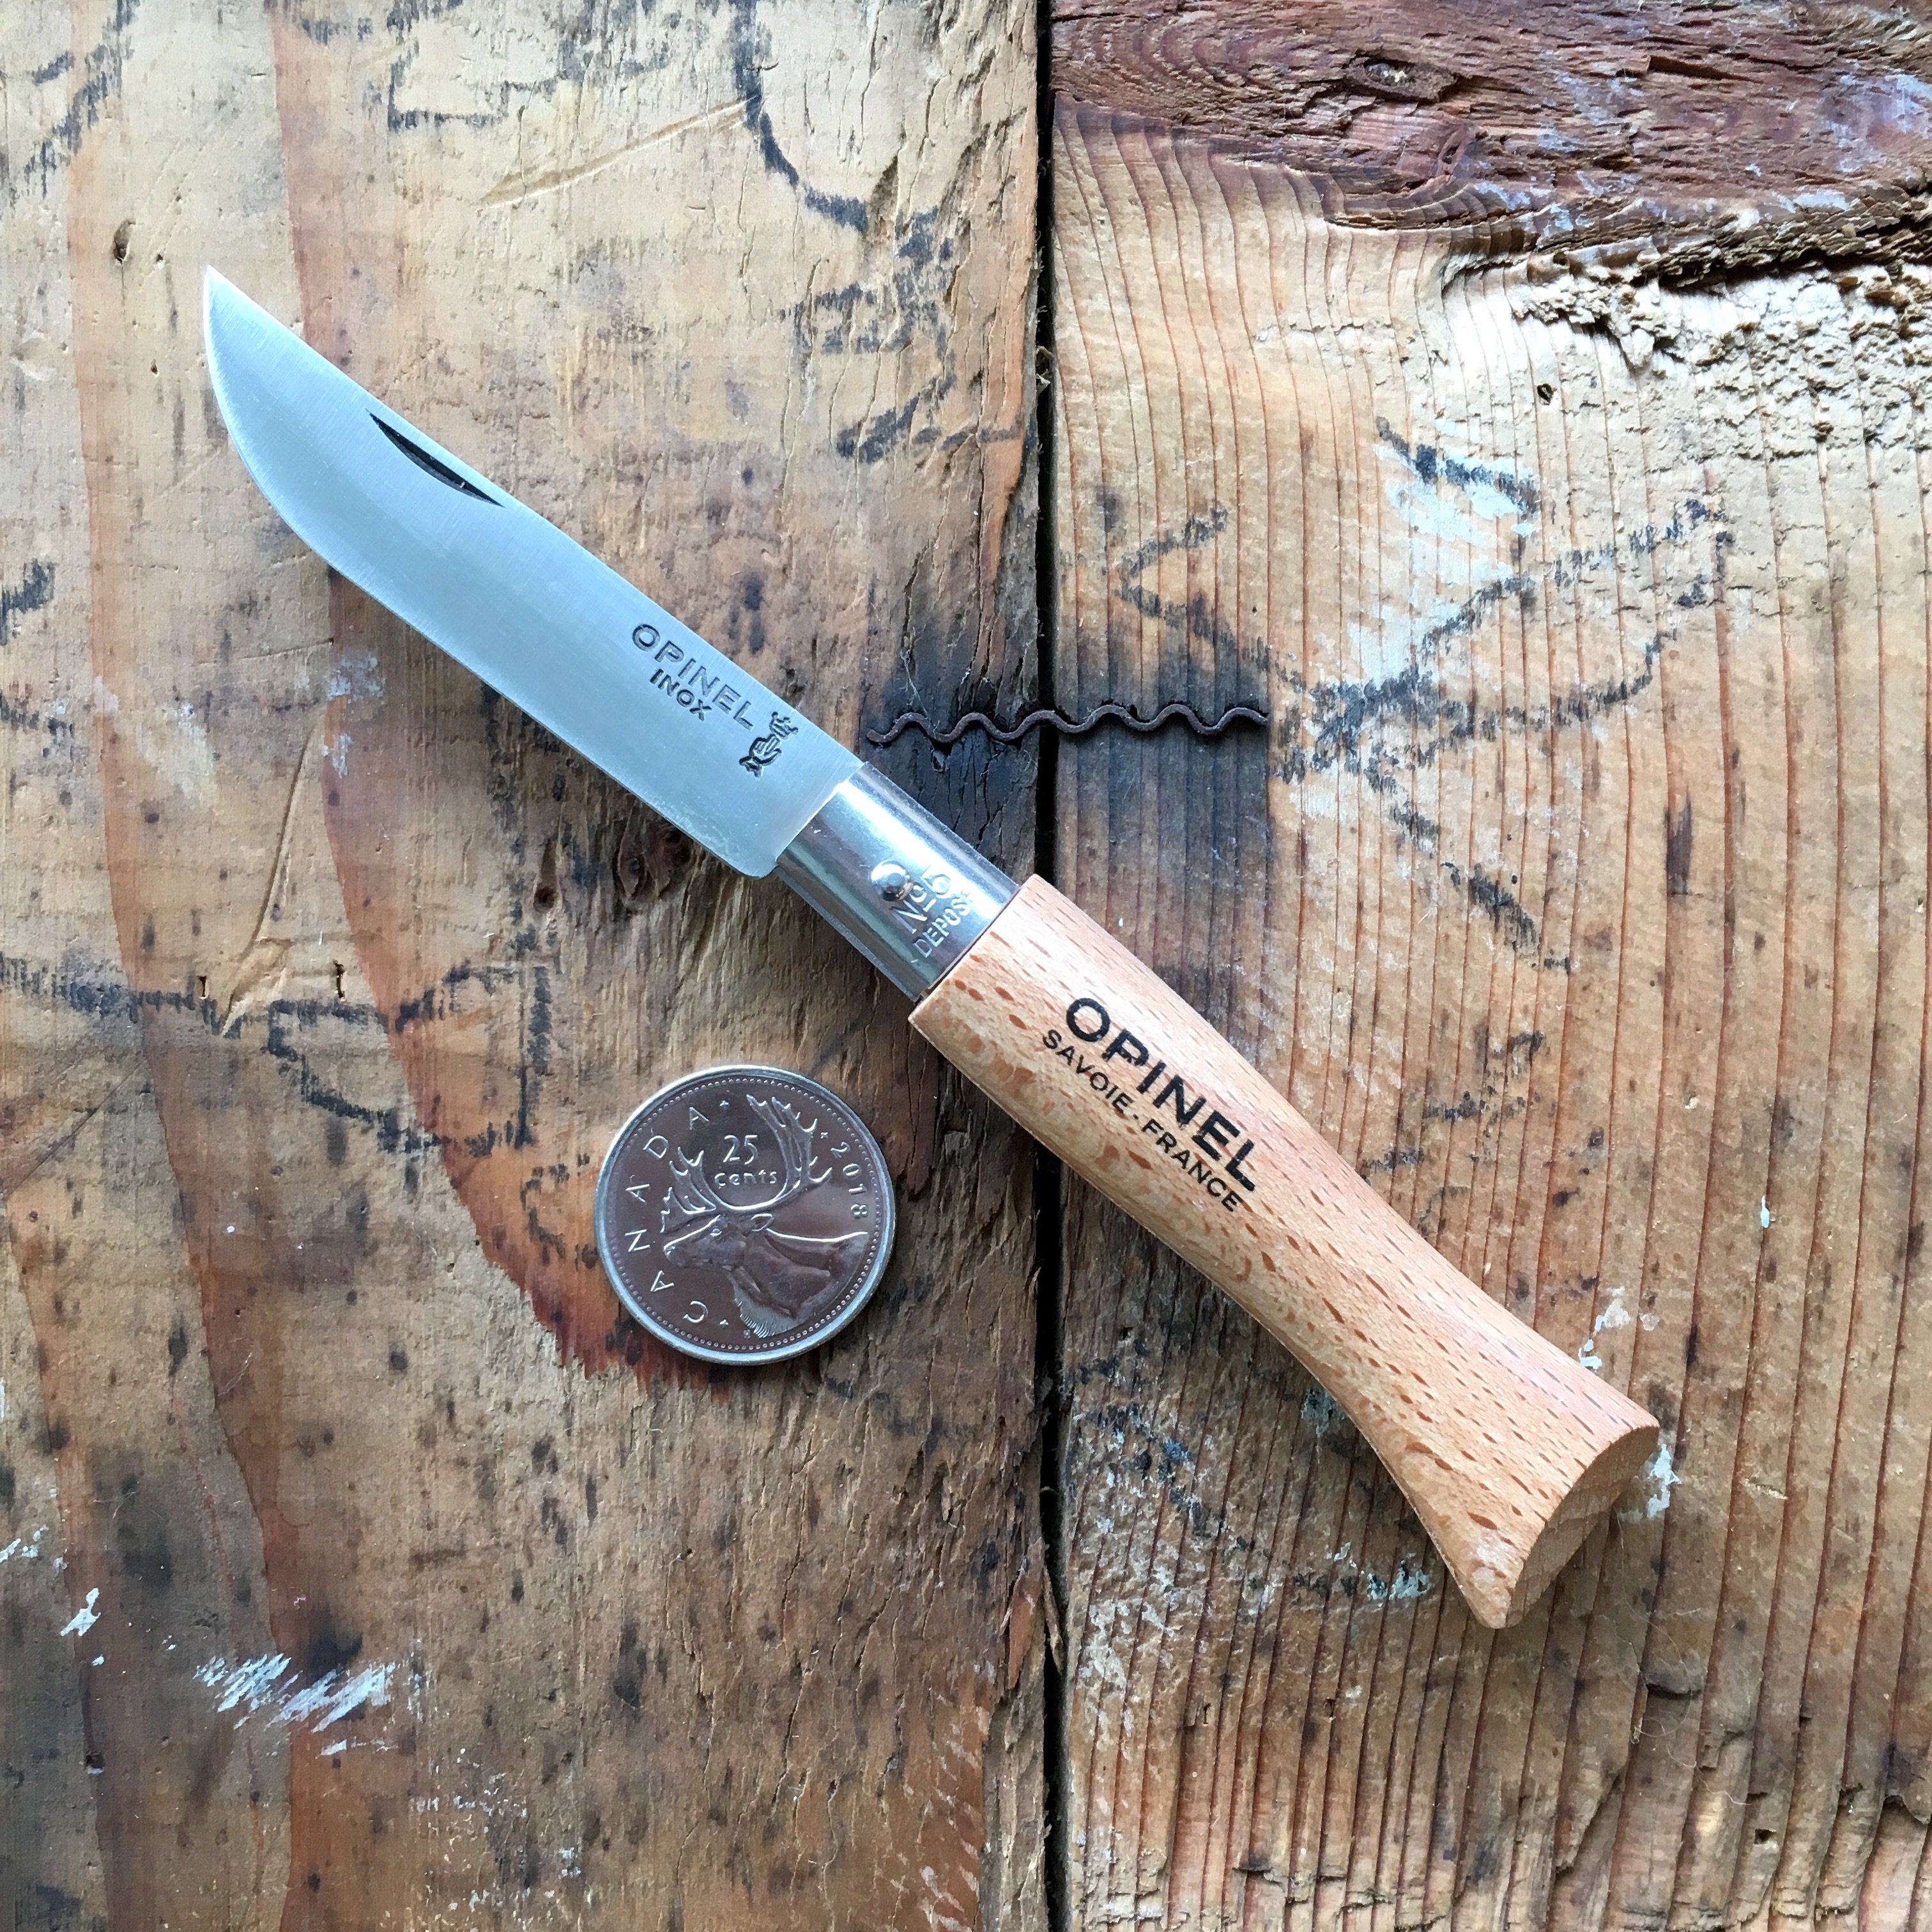 Buy Opinel No 12 Carbon Steel Knive Online at Low Prices in India 